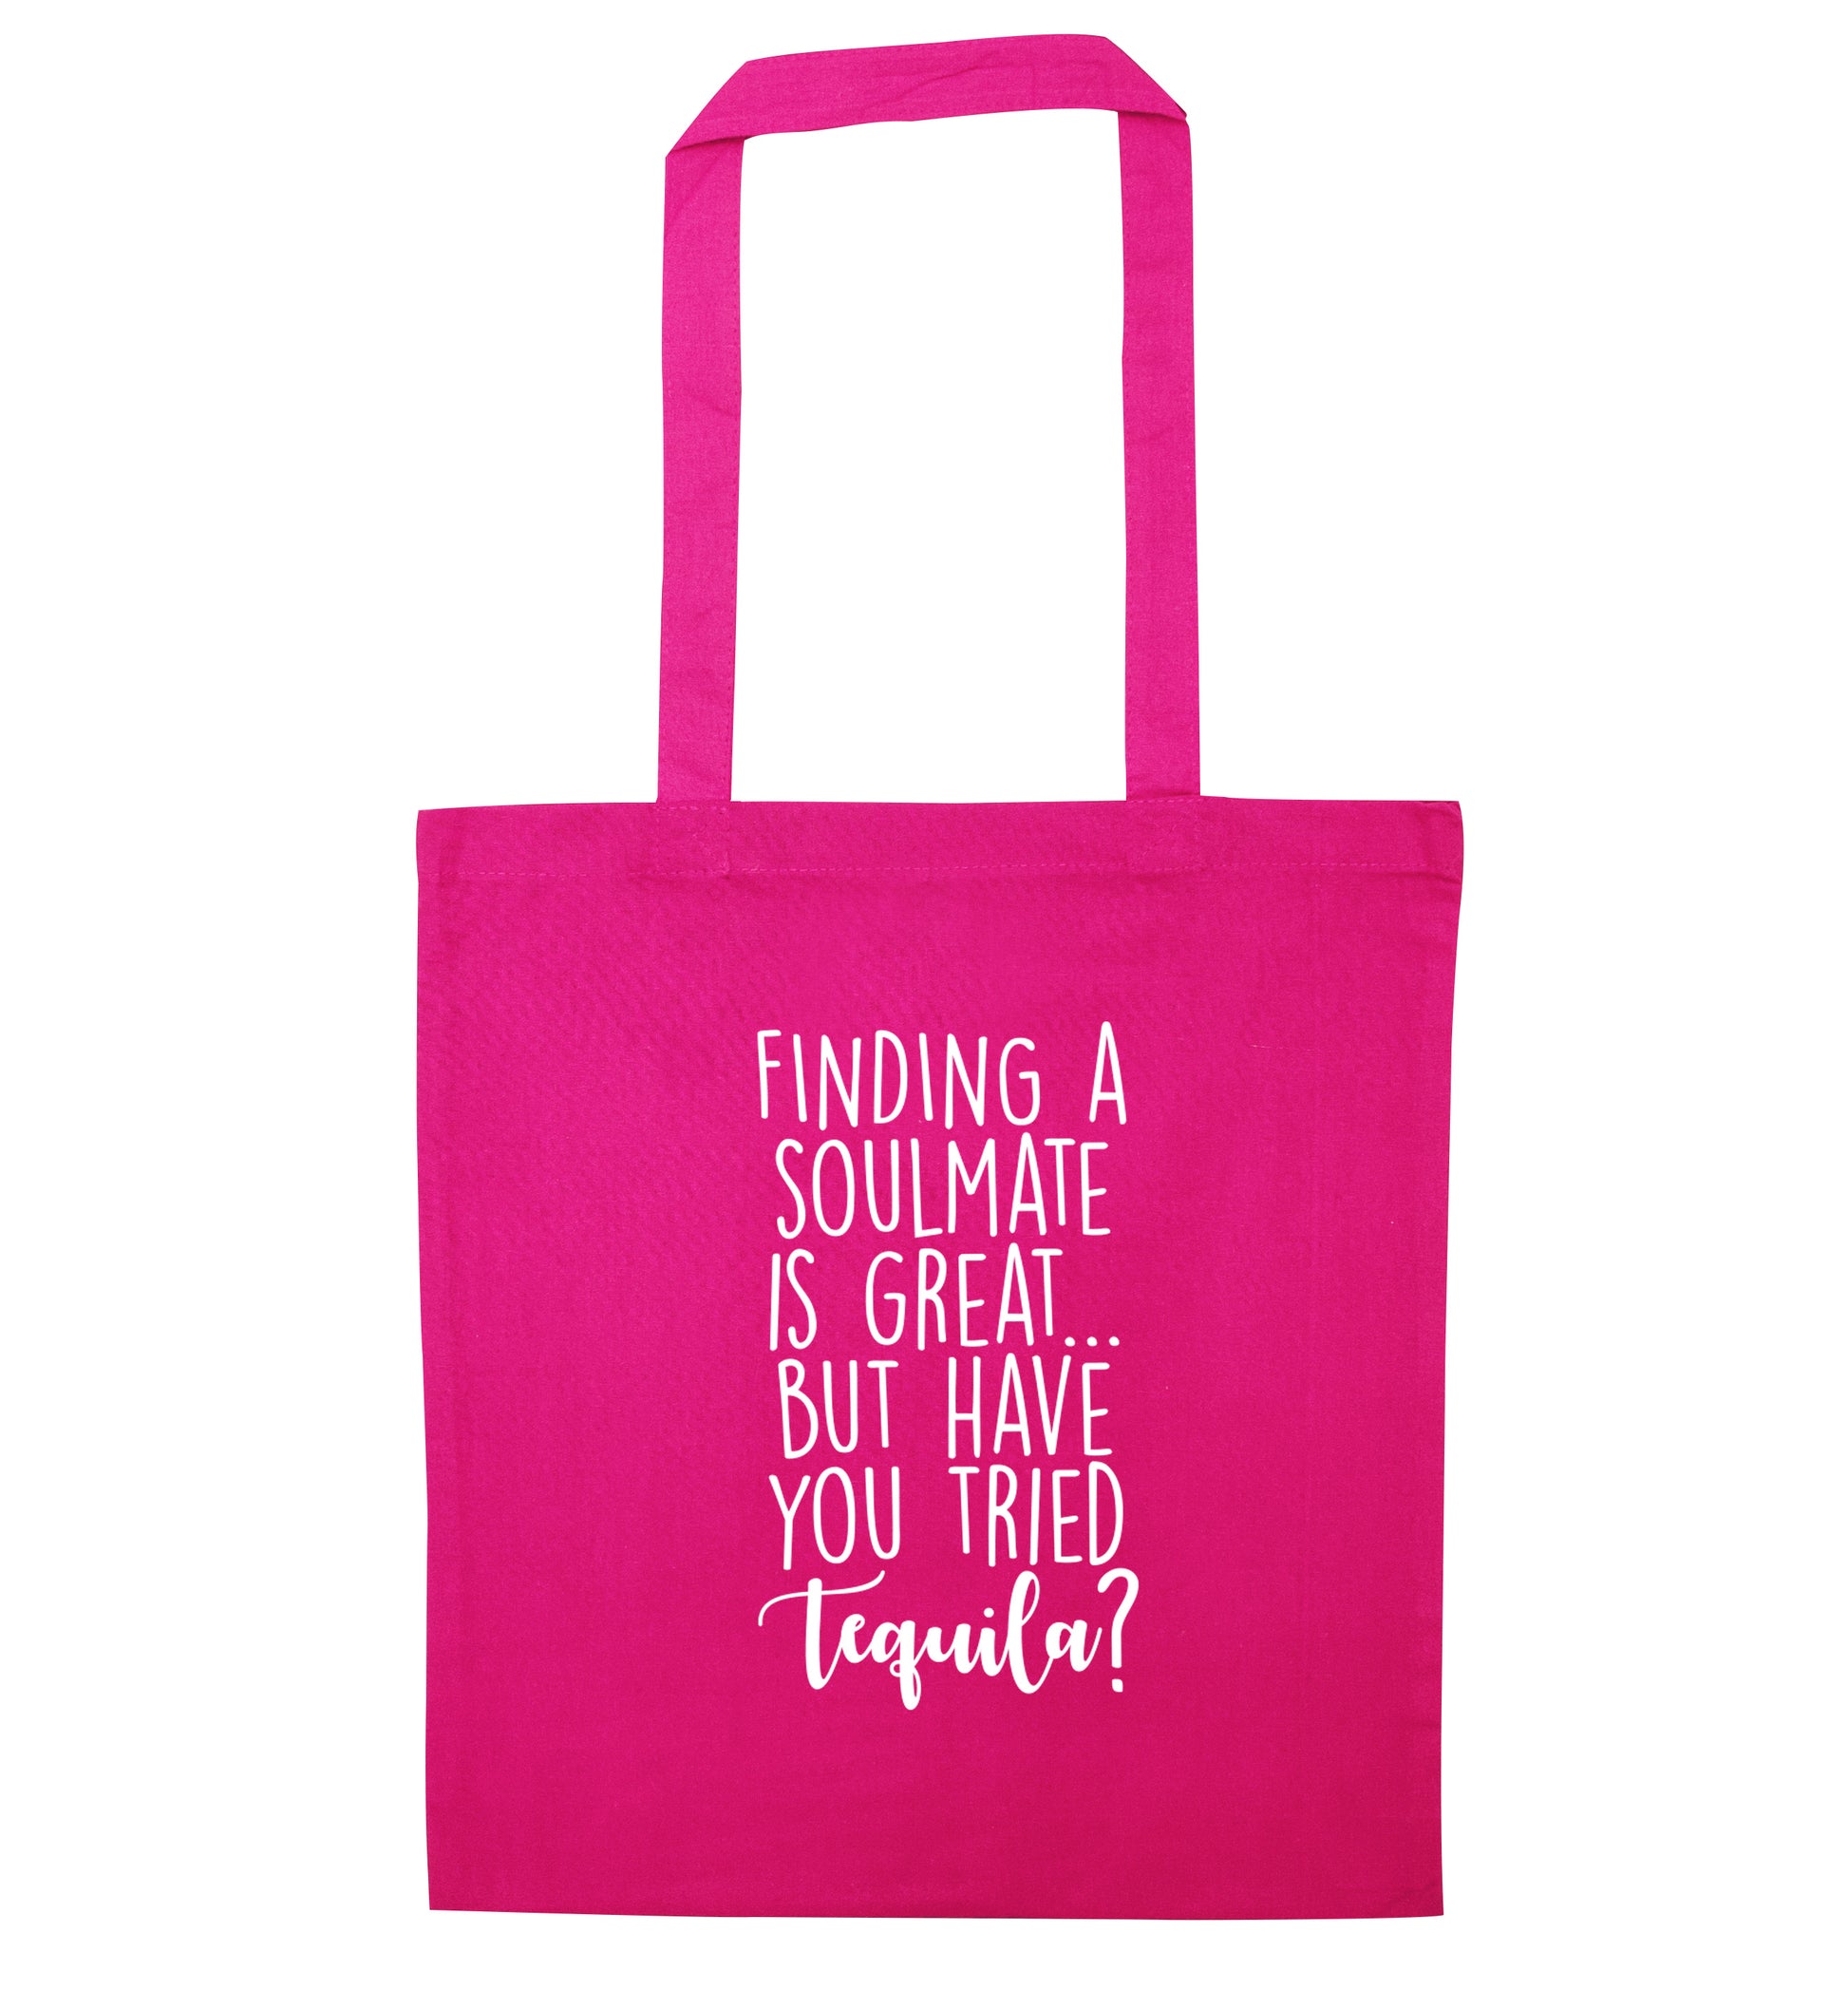 Finding a soulmate is great but have you tried tequila? pink tote bag